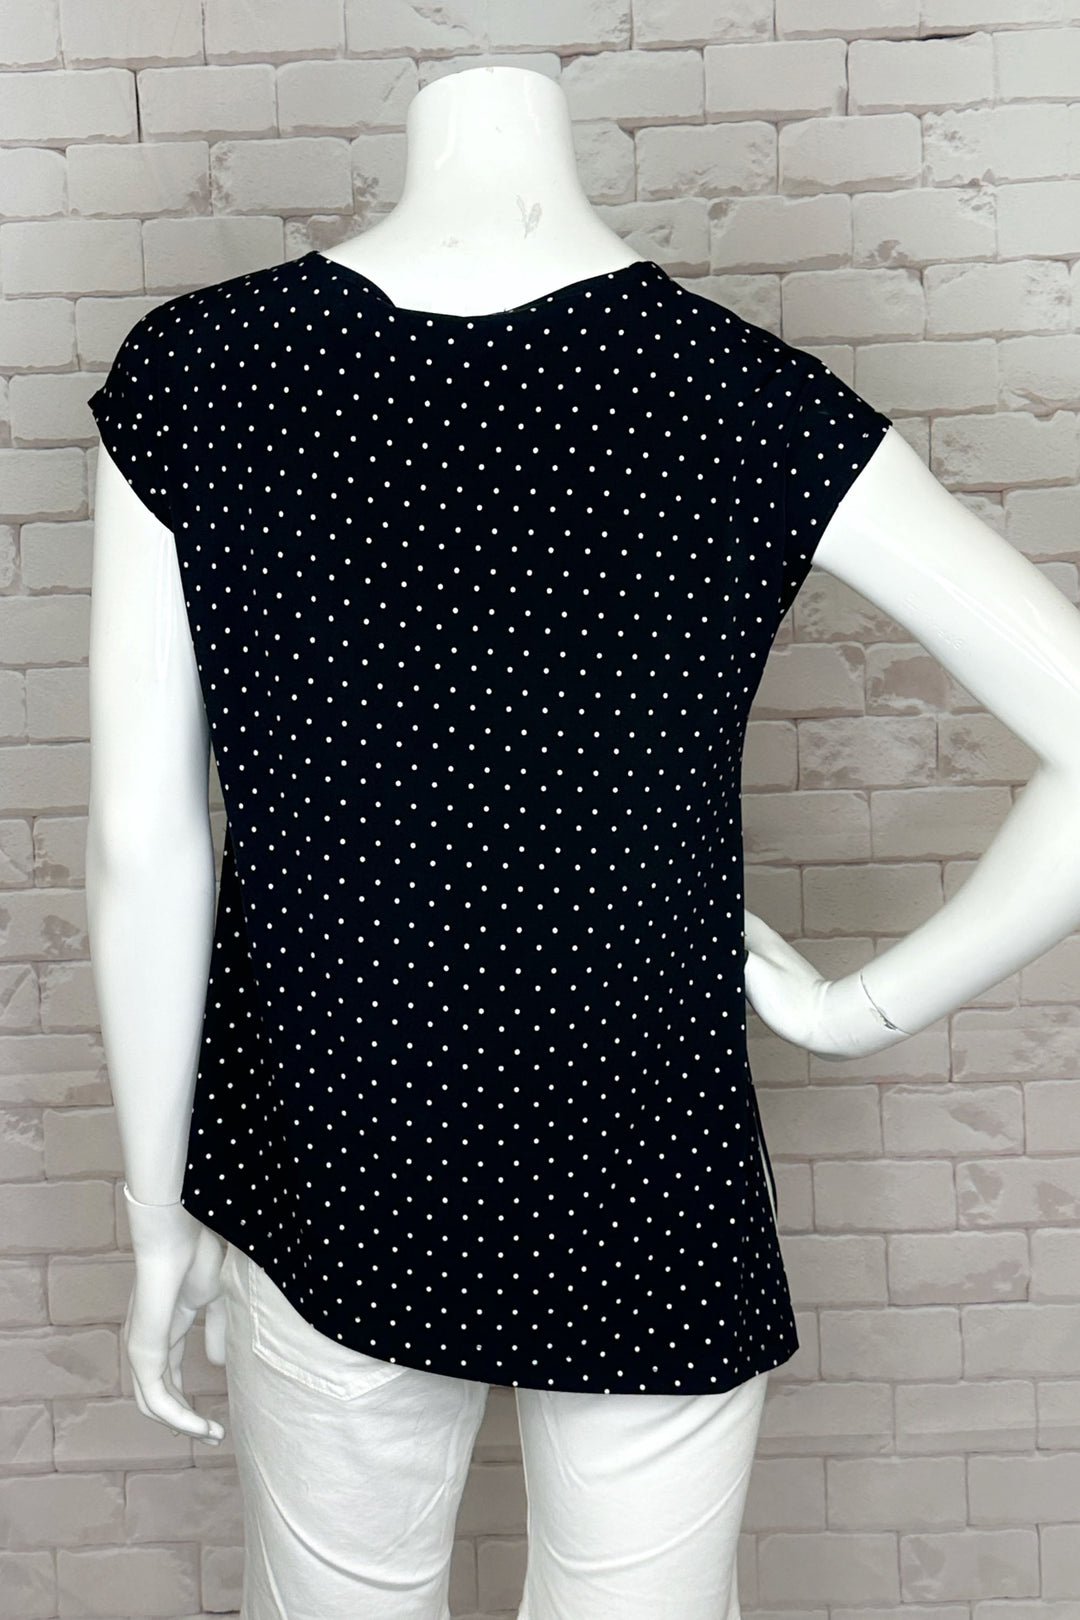 SLANT TOP BLACK WITH DOTS